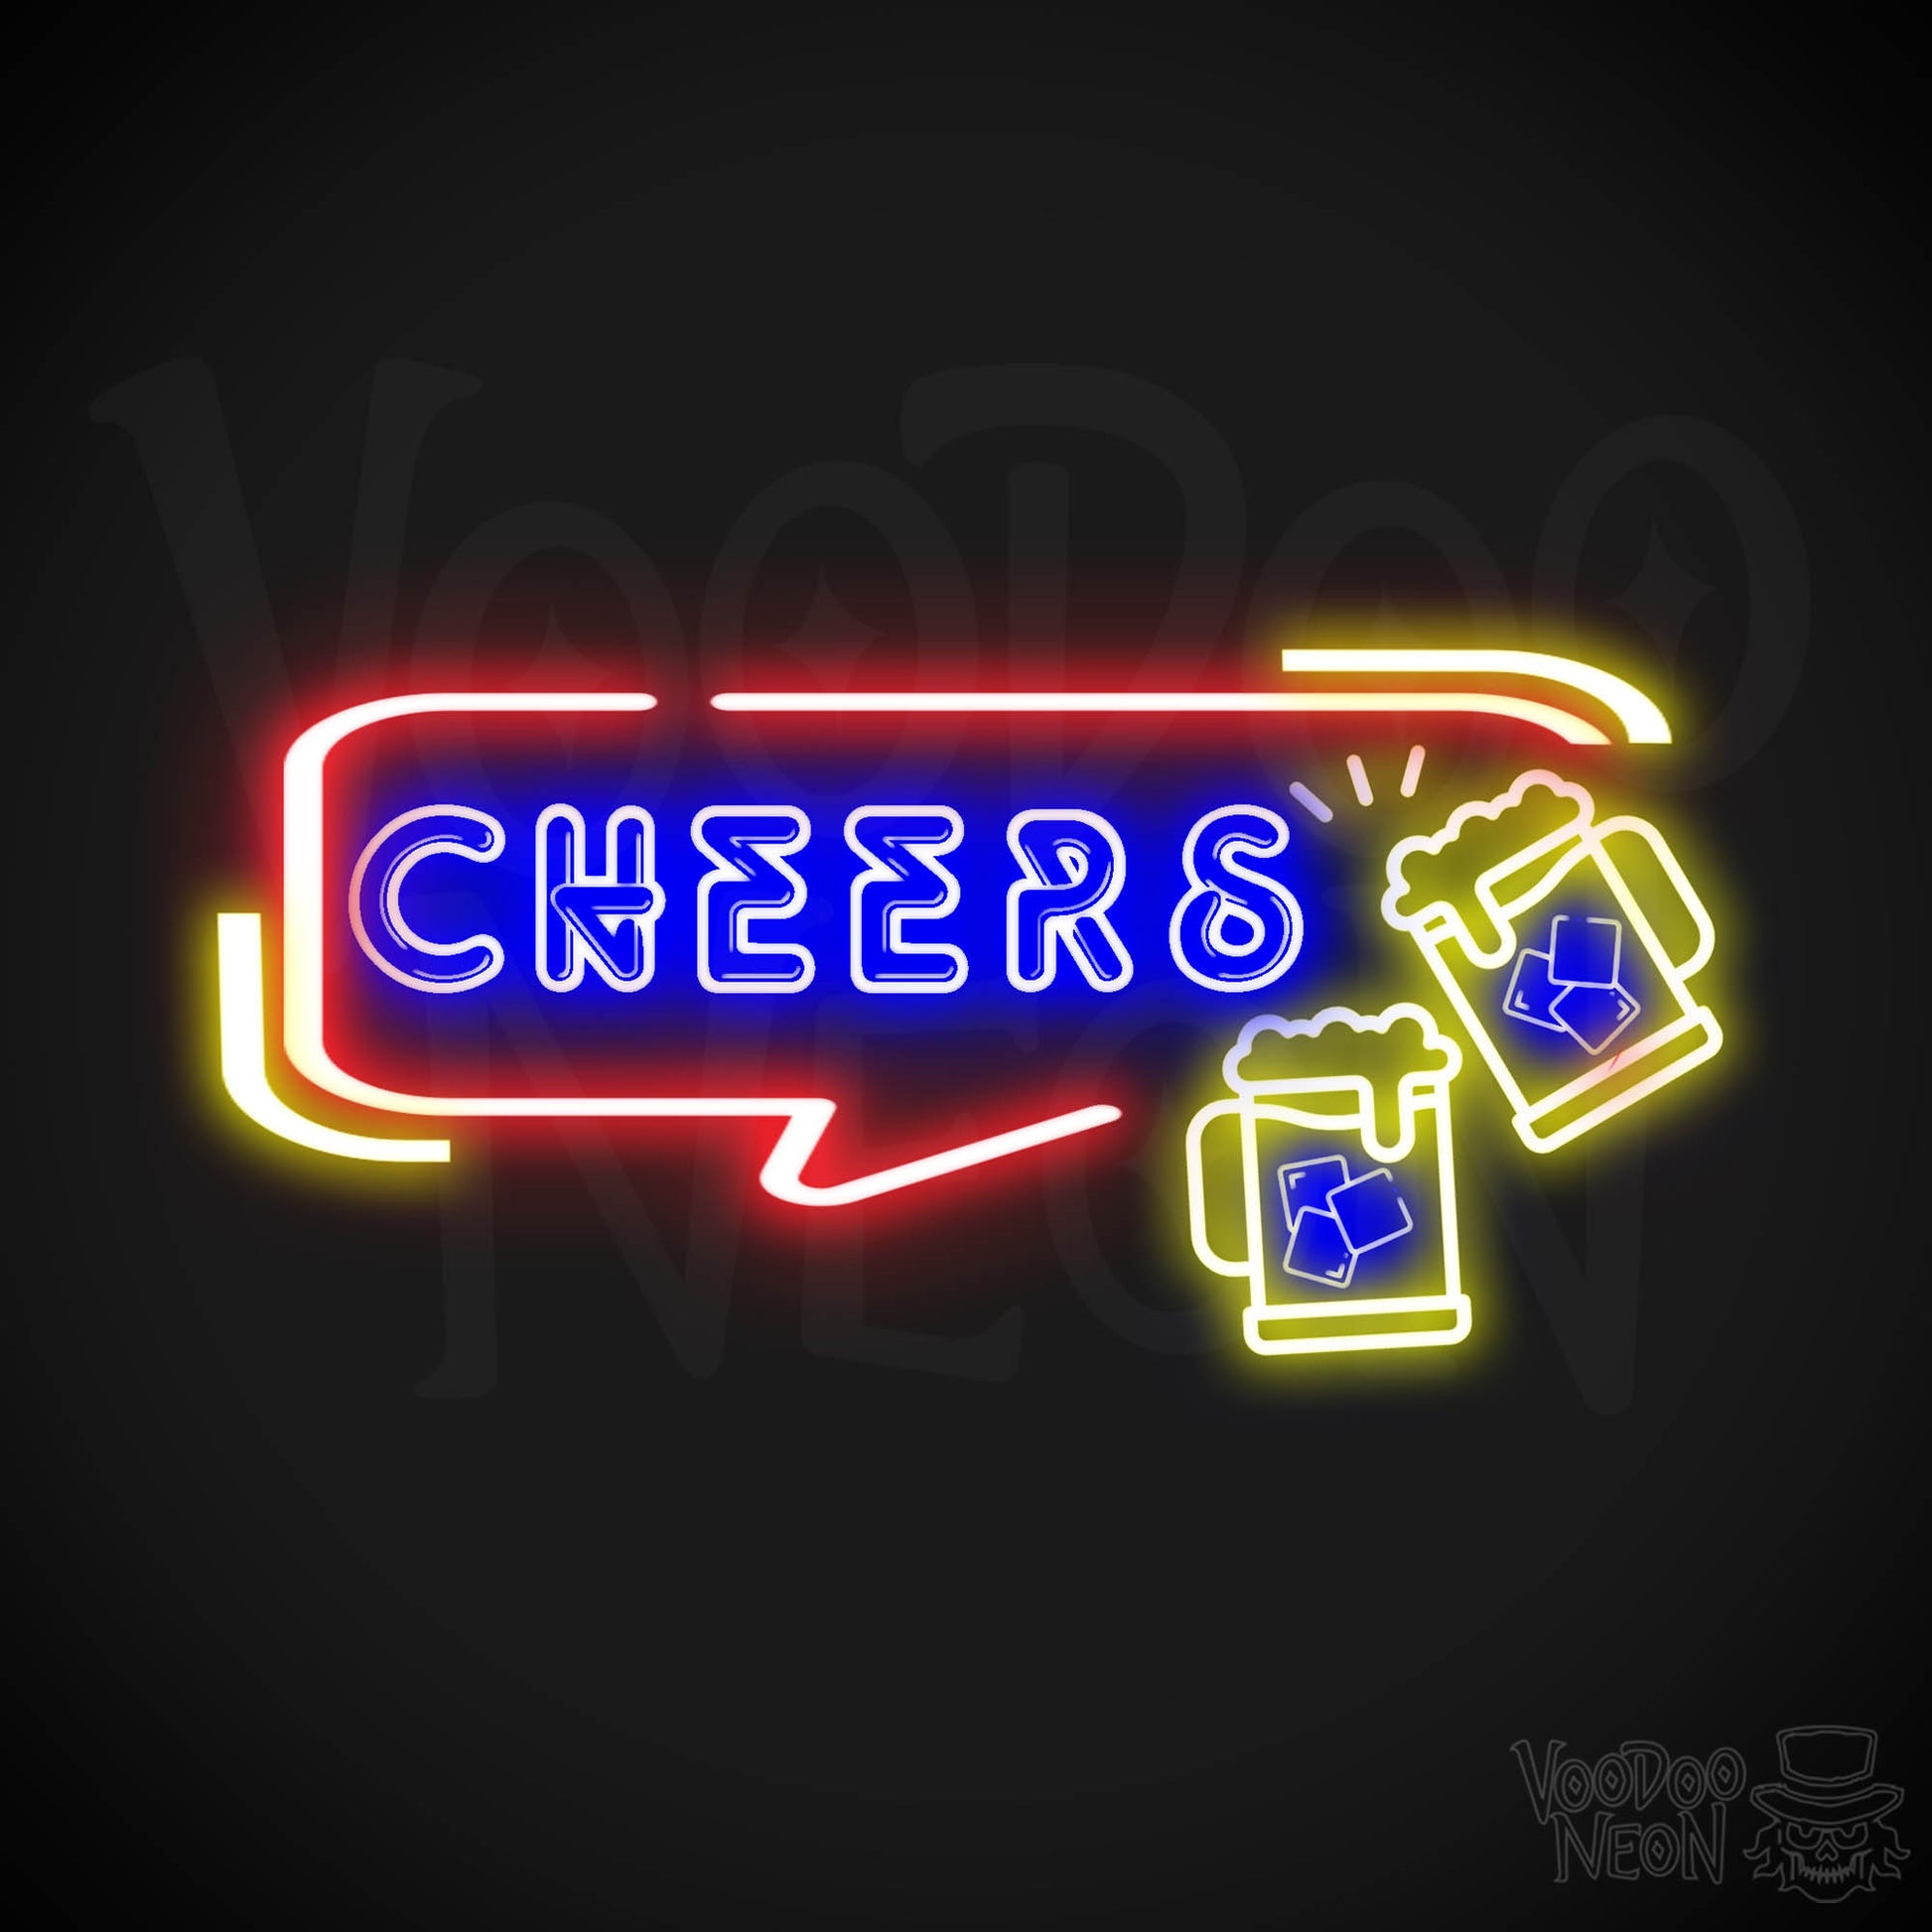 Cheers Neon Sign - Neon Cheers Bar Sign - LED Neon Wall Art - Color Multi-Color